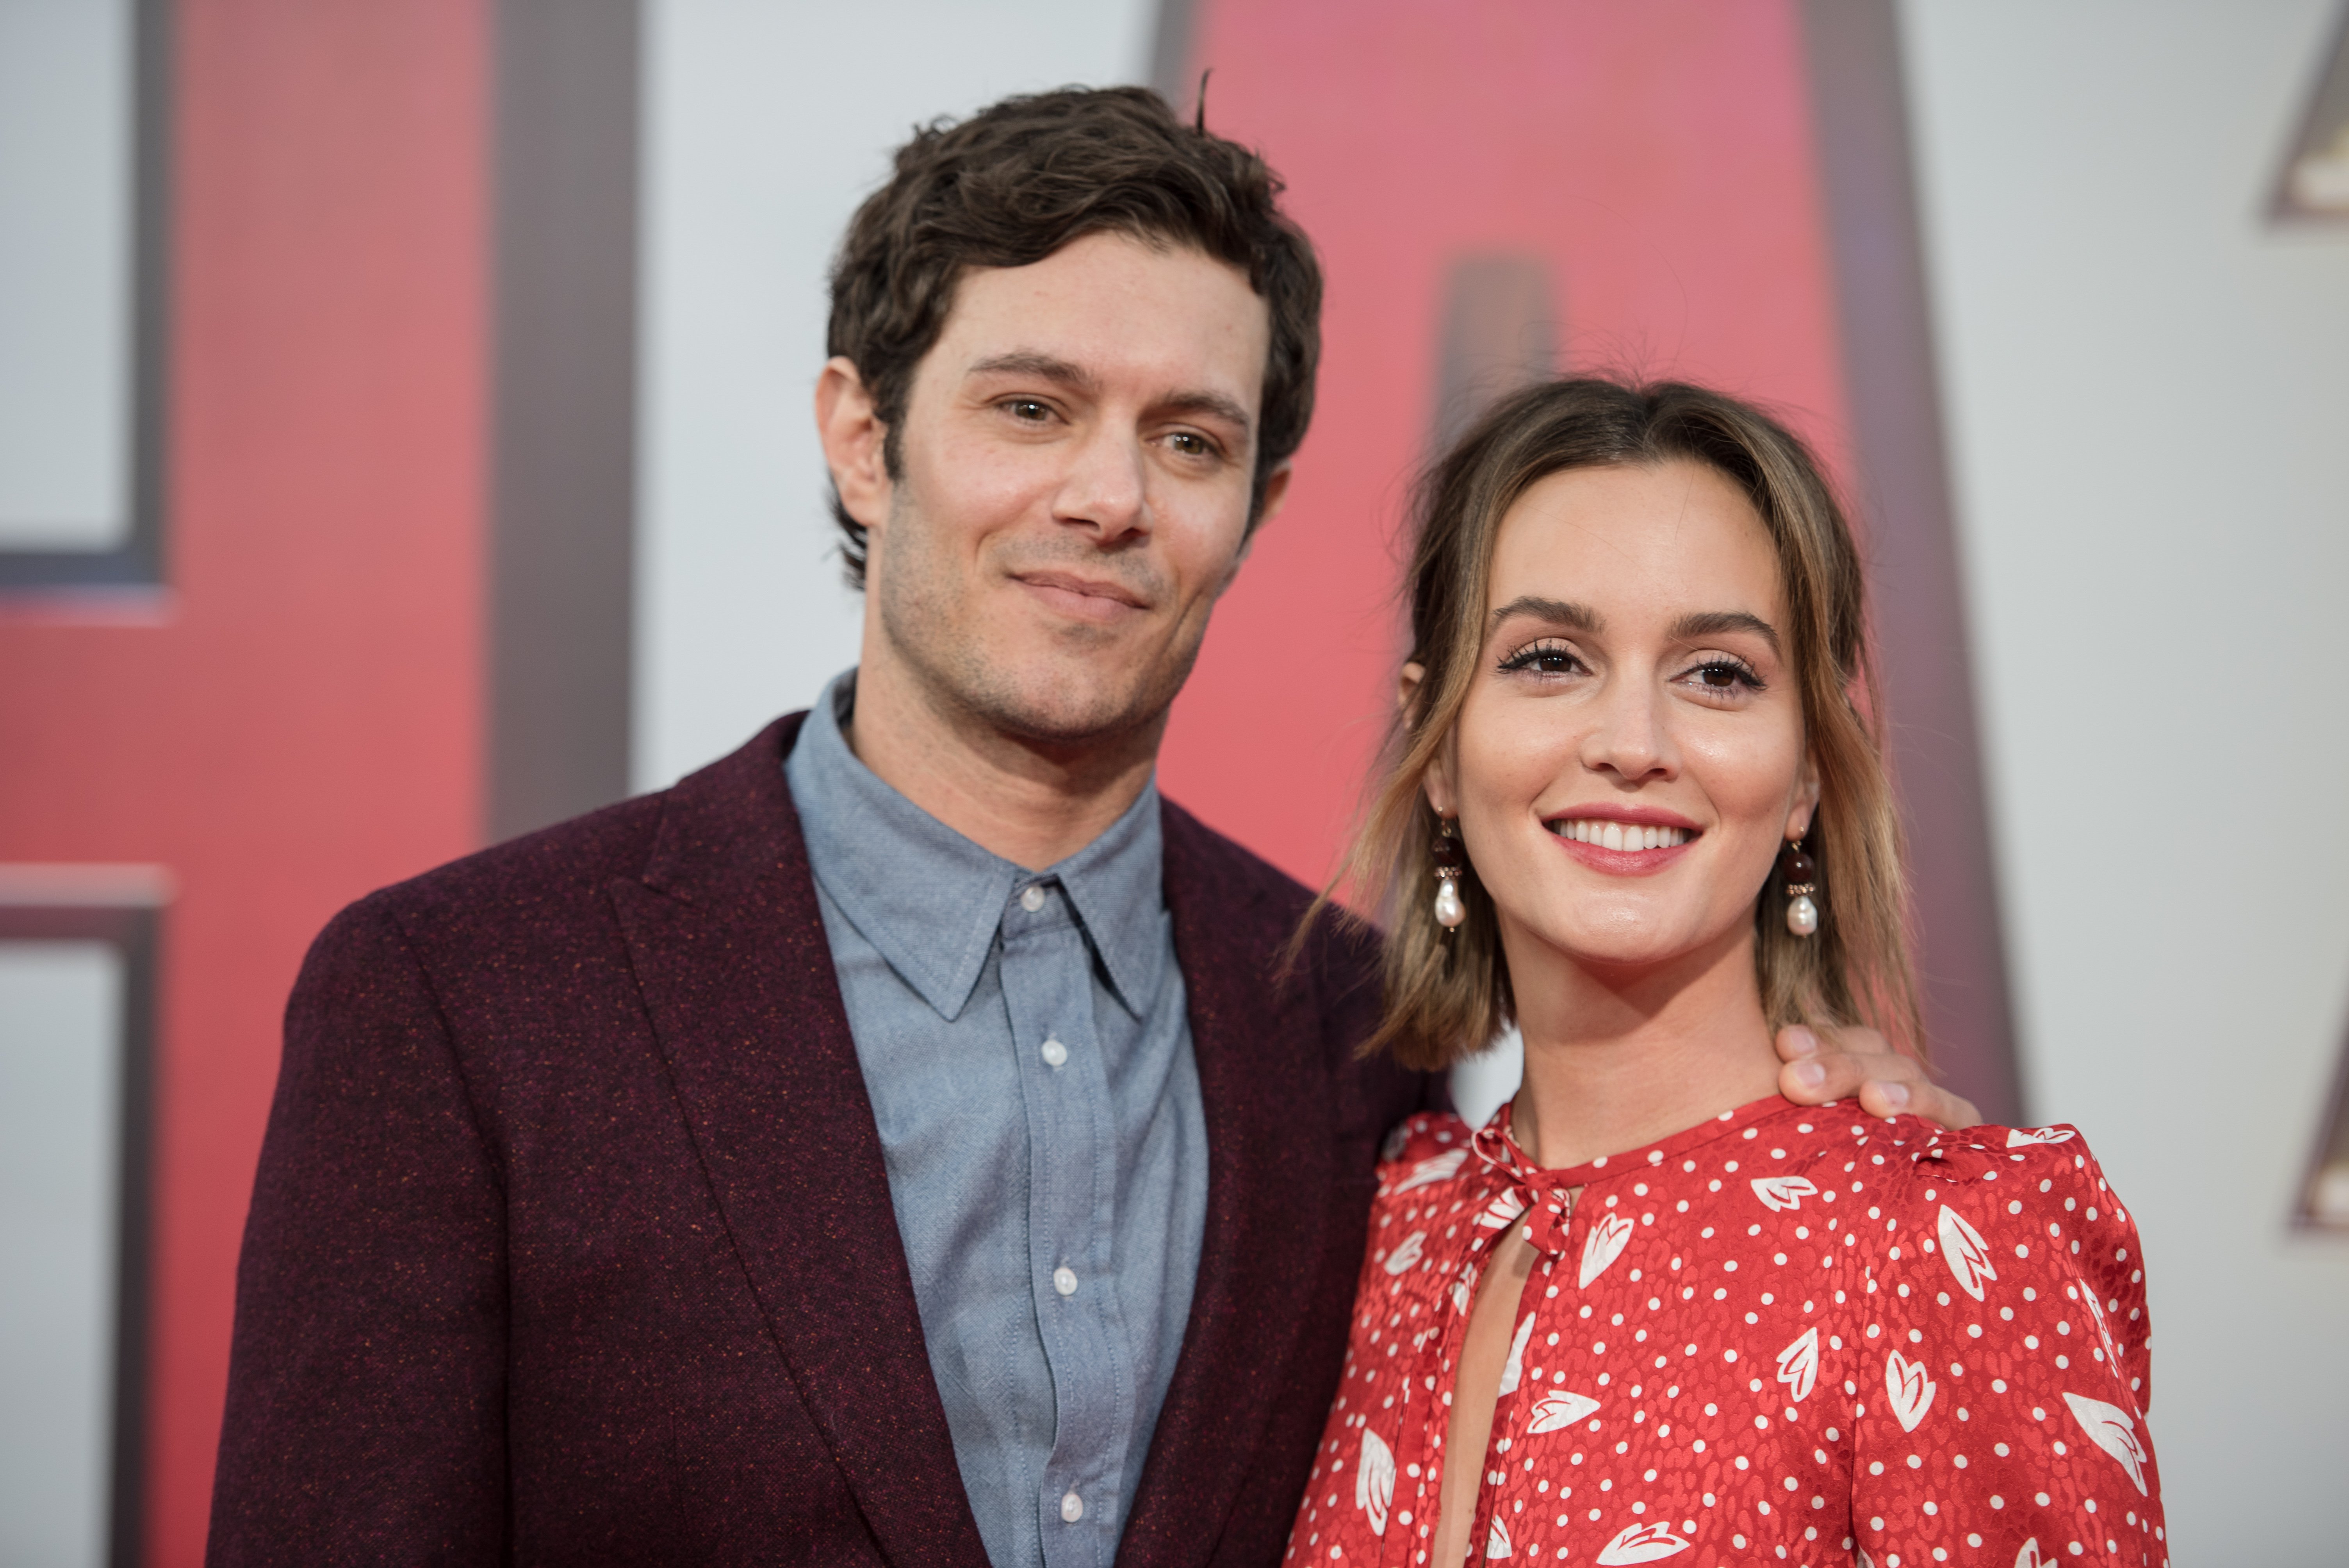 Adam Brody and Leighton Meester at the world premiere of 'Shazam!', March 2019 | Source: Getty Images